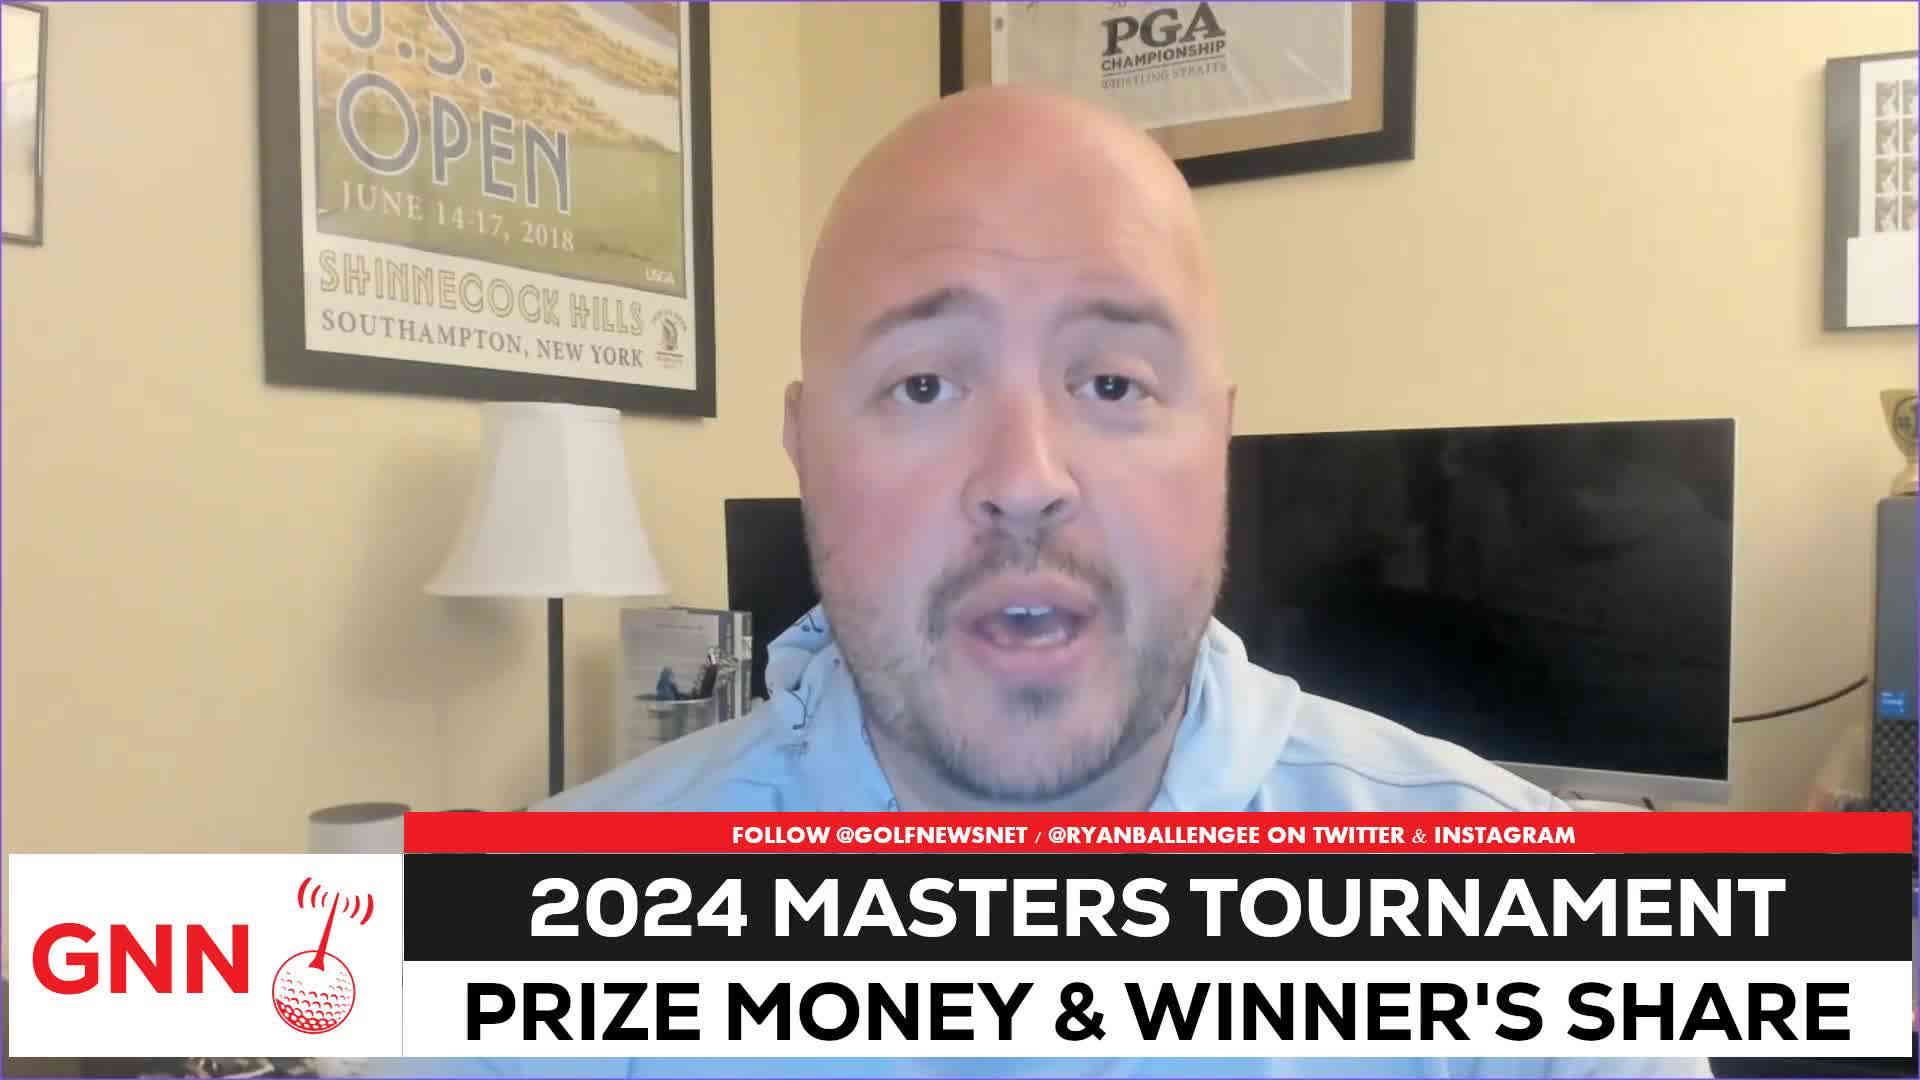 The Masters 2024 purse and winner's share are huge